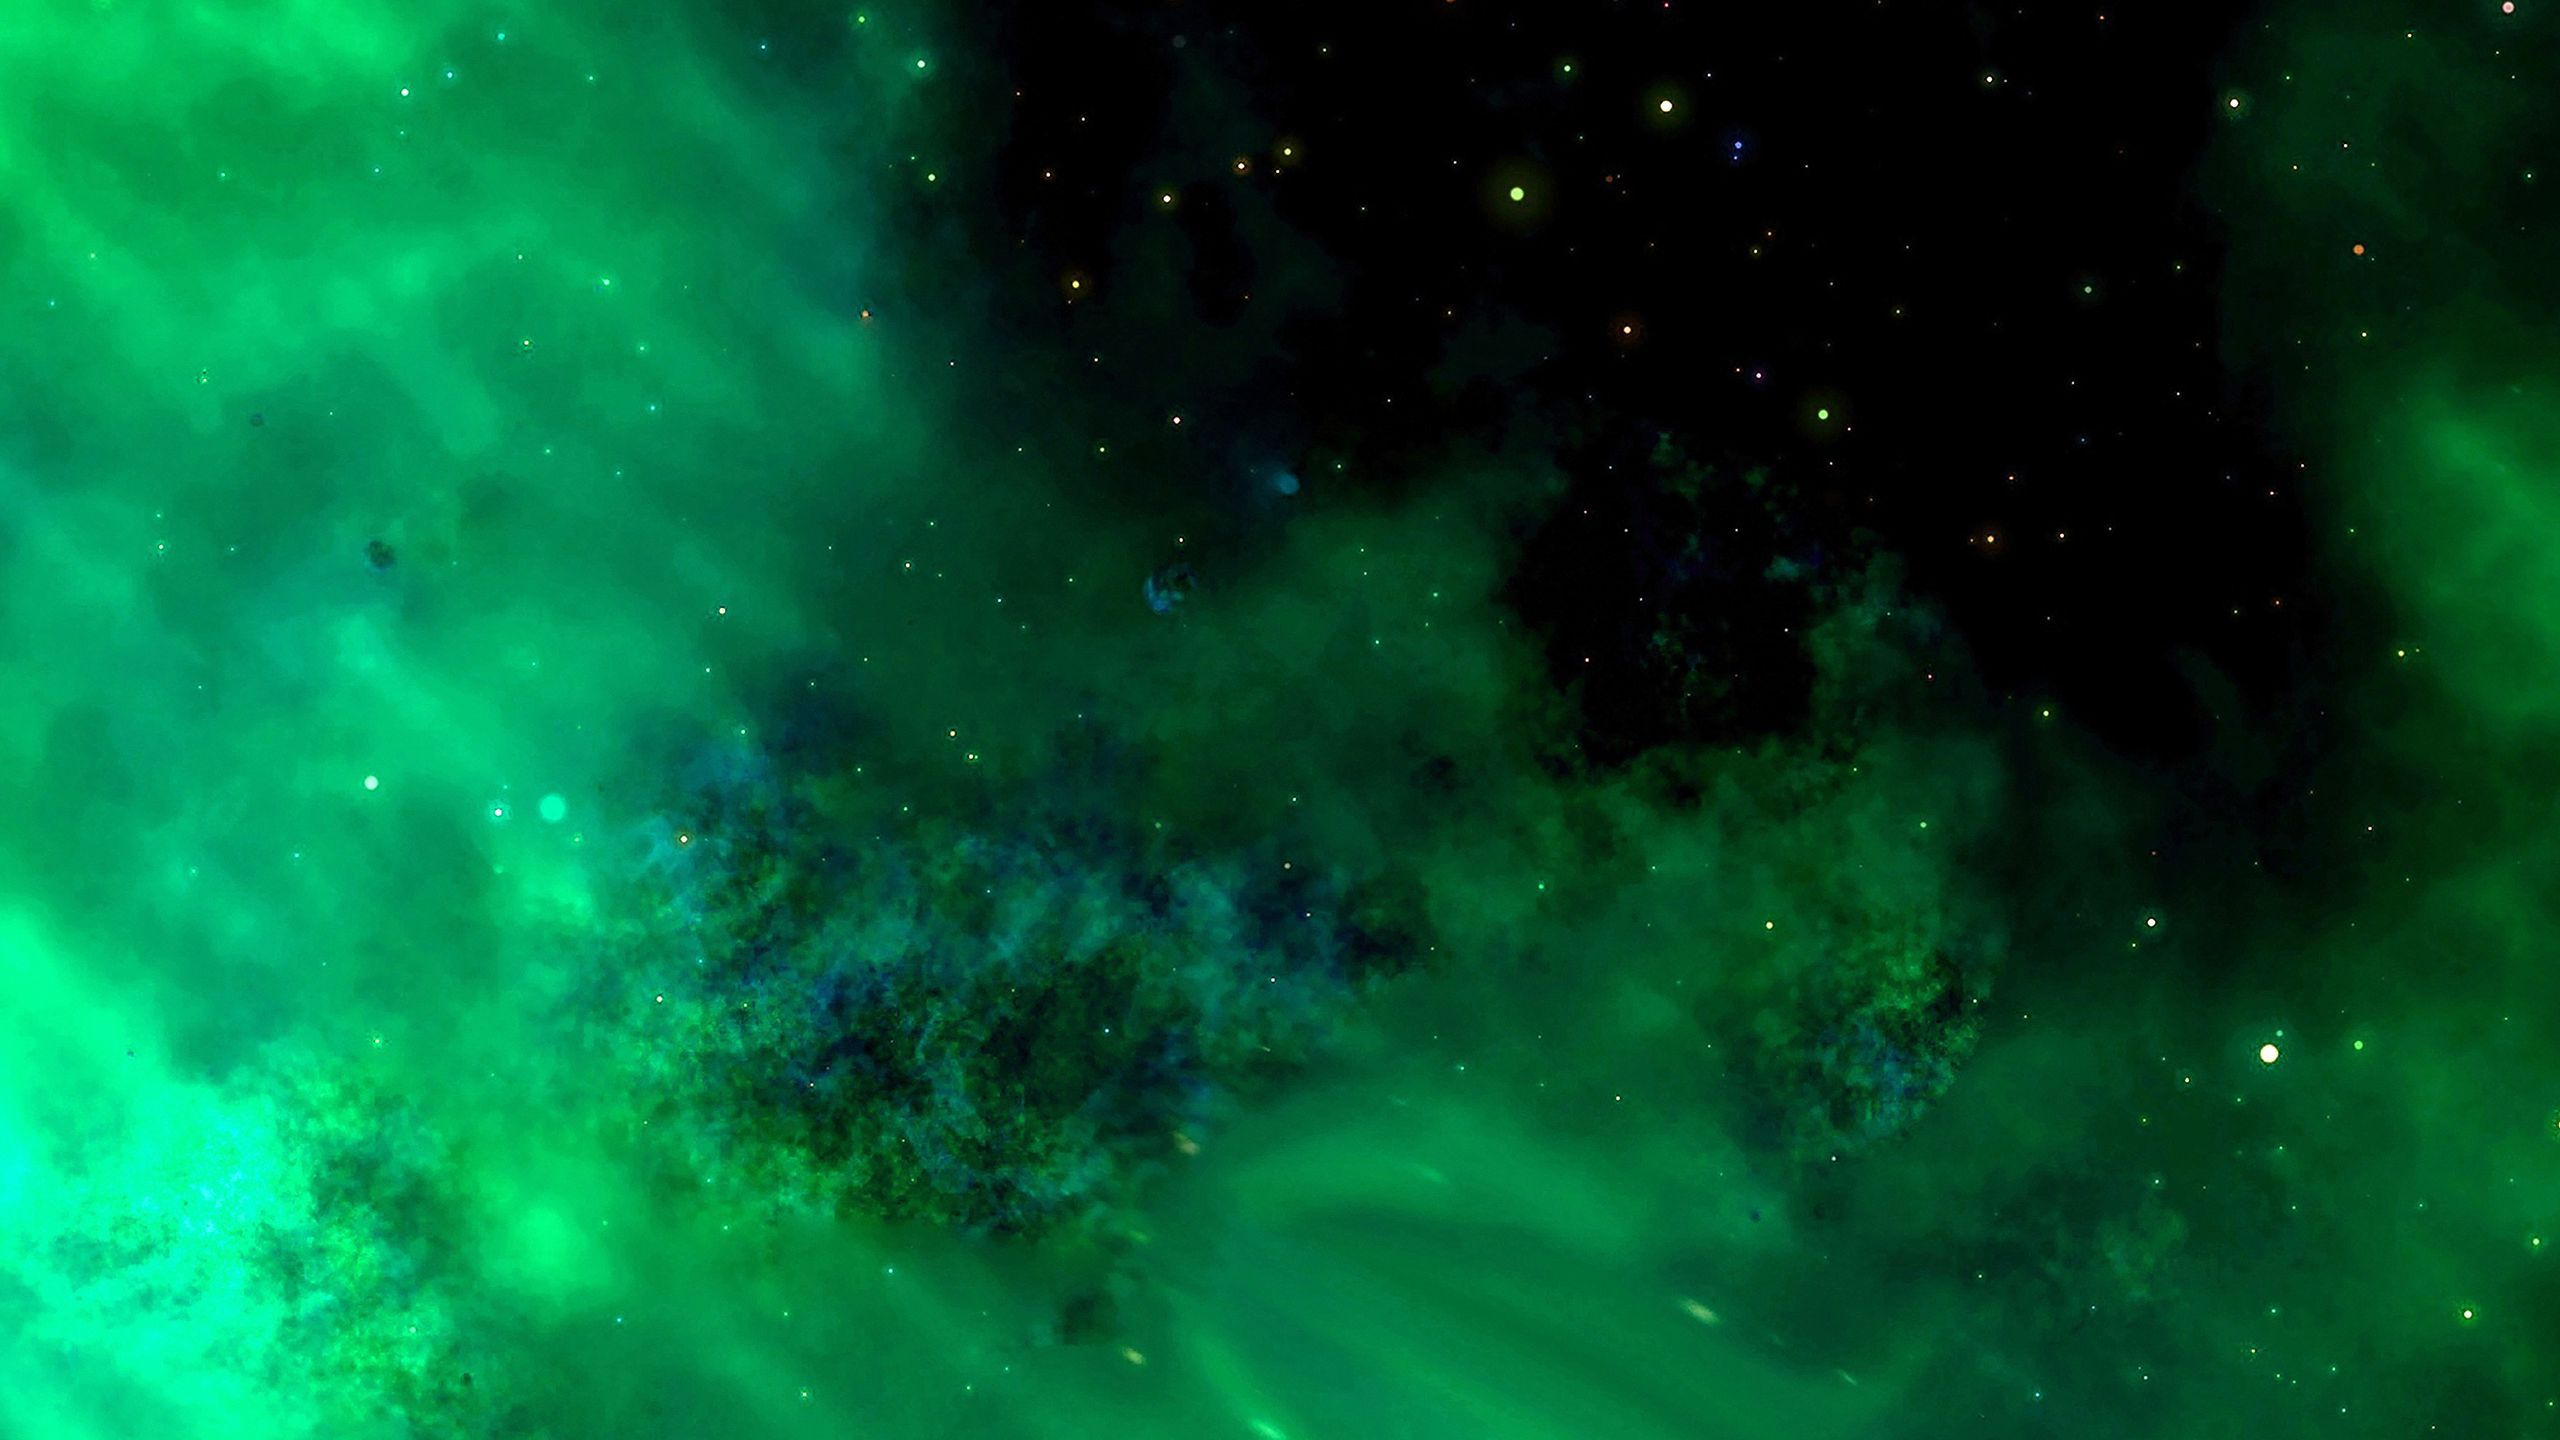 Download wallpaper 2560x1440 space, universe, stars galaxy, radiance, green widescreen 16:9 HD background